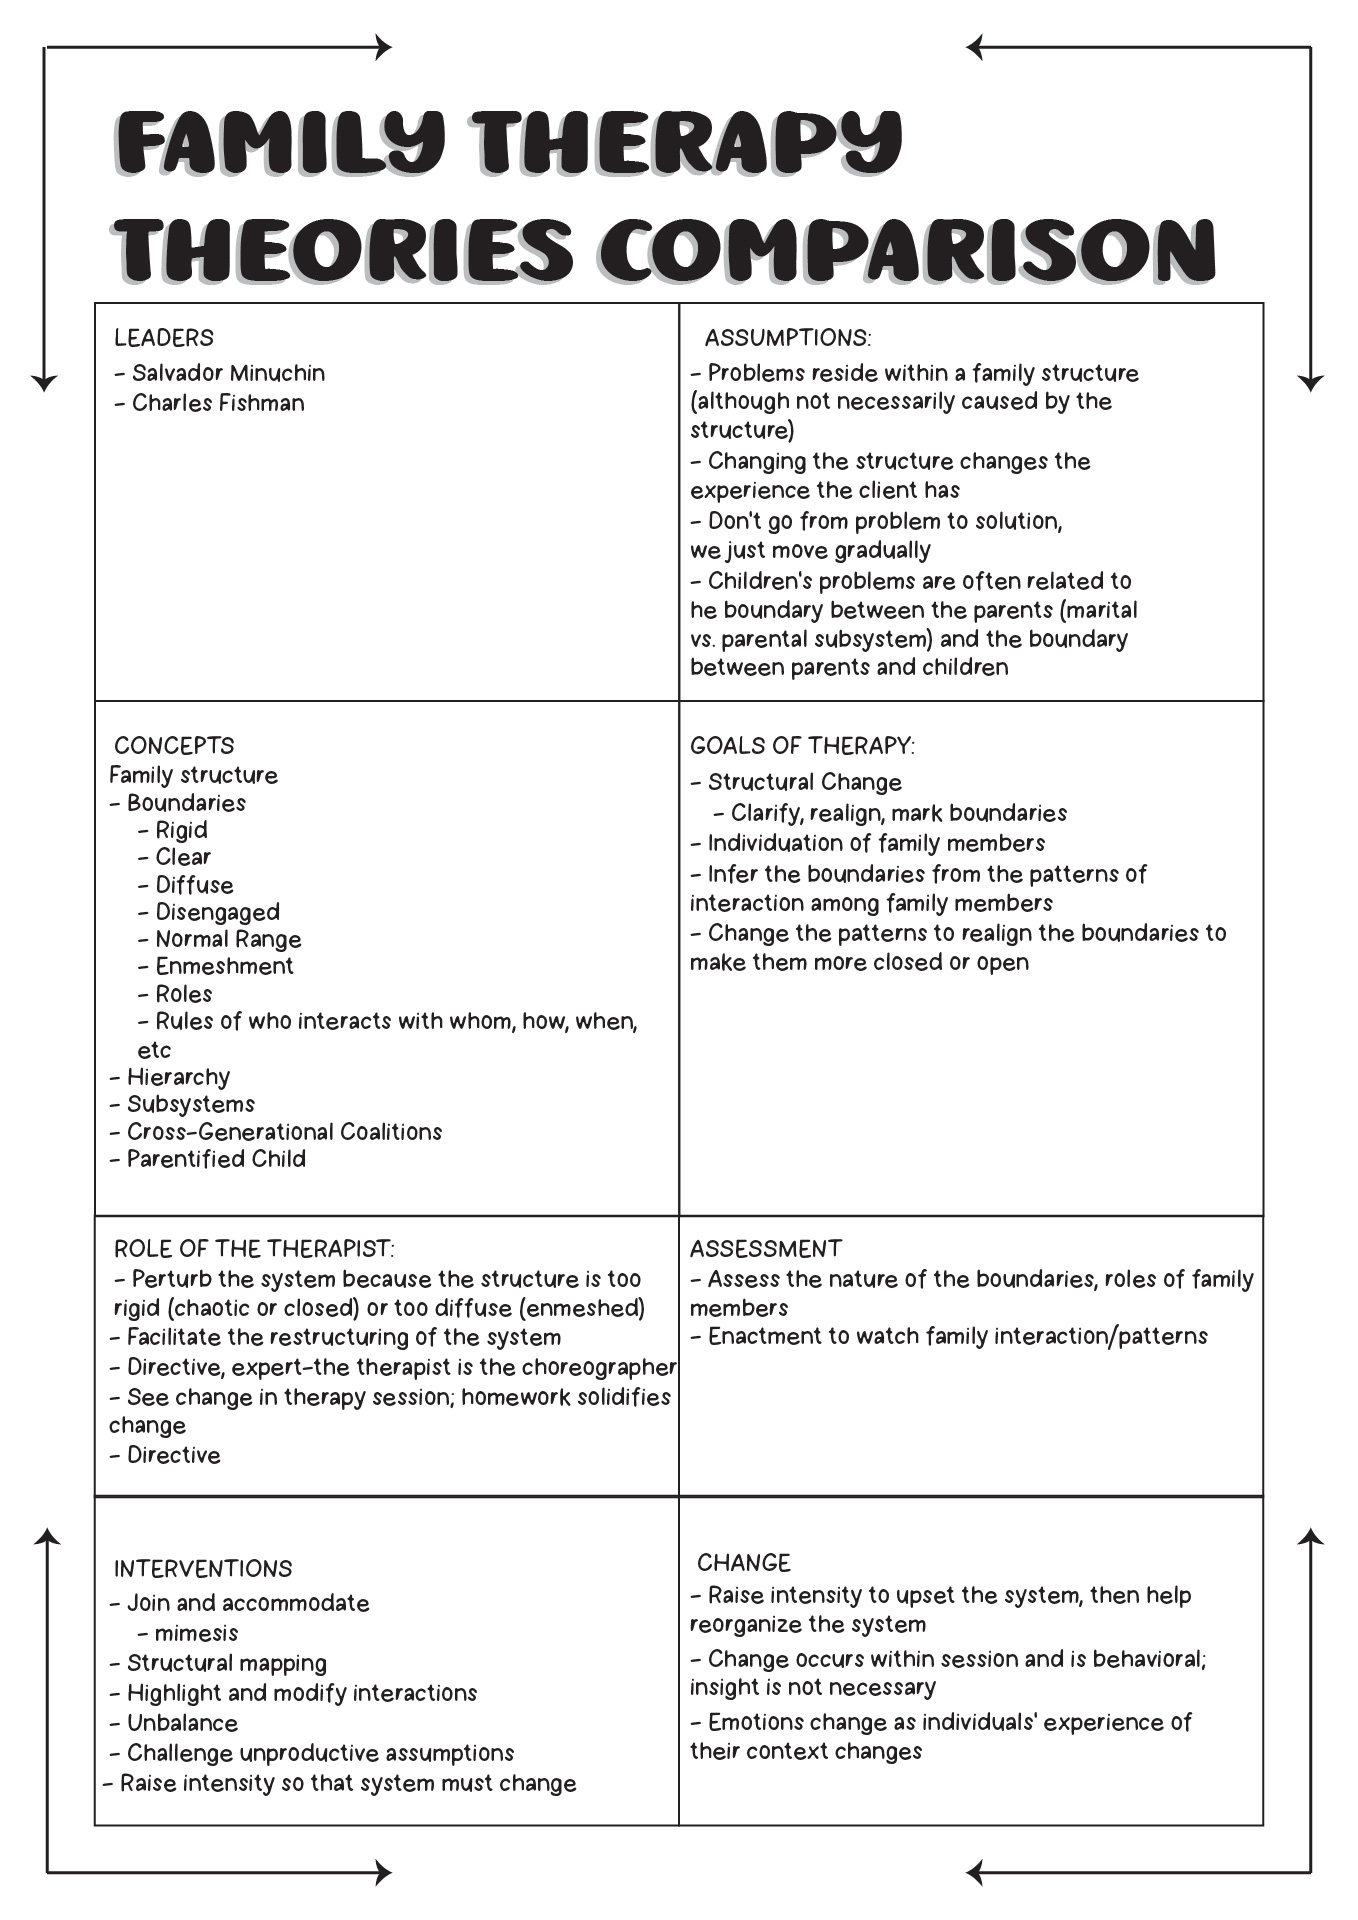 Family Therapy Theories Comparison Chart